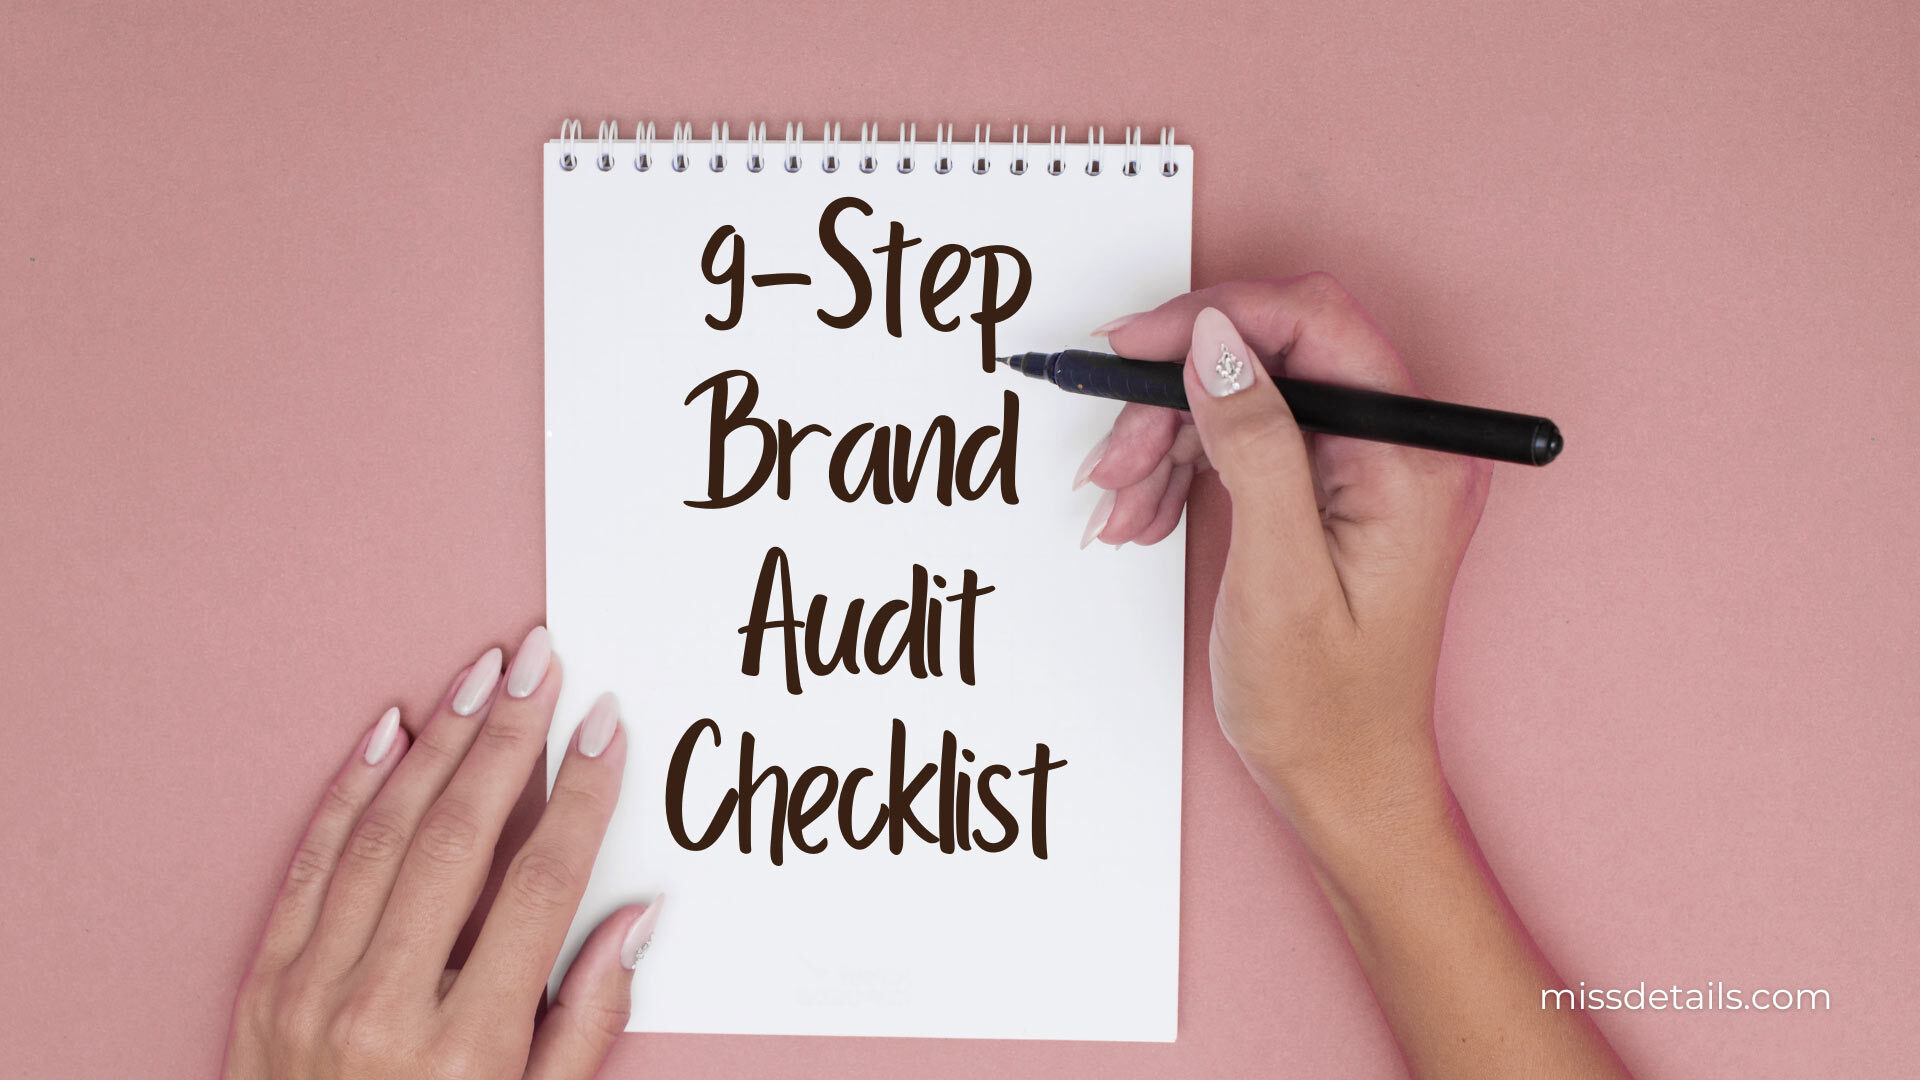 9-Step Brand Audit Checklist: Your Tool to Level Up Your First Impression